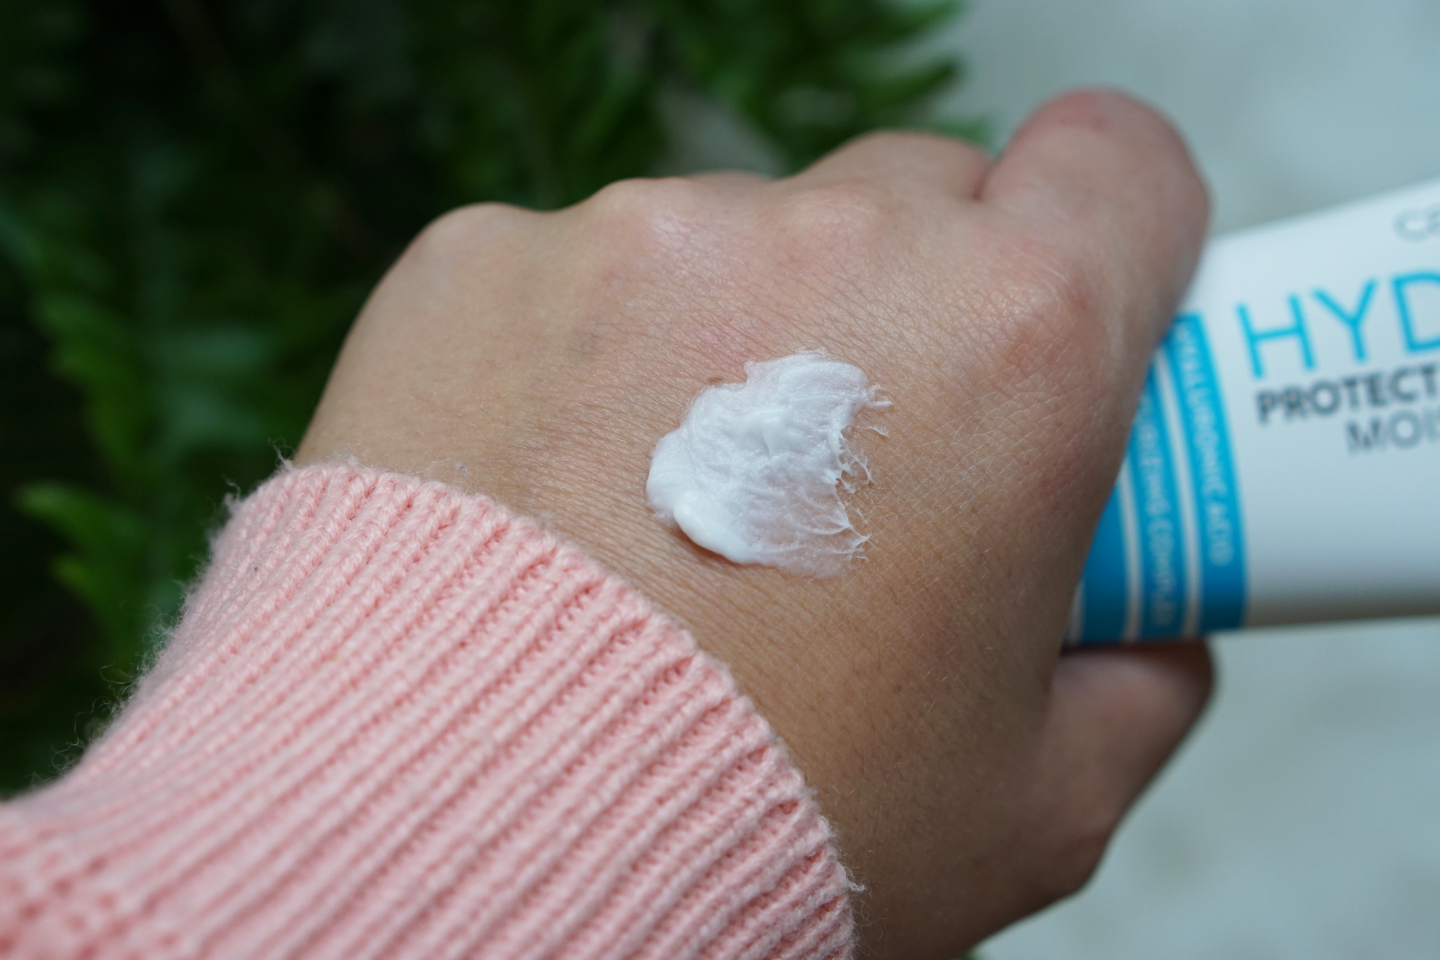 Hydro Melting Protect review Moisturizer Catrice